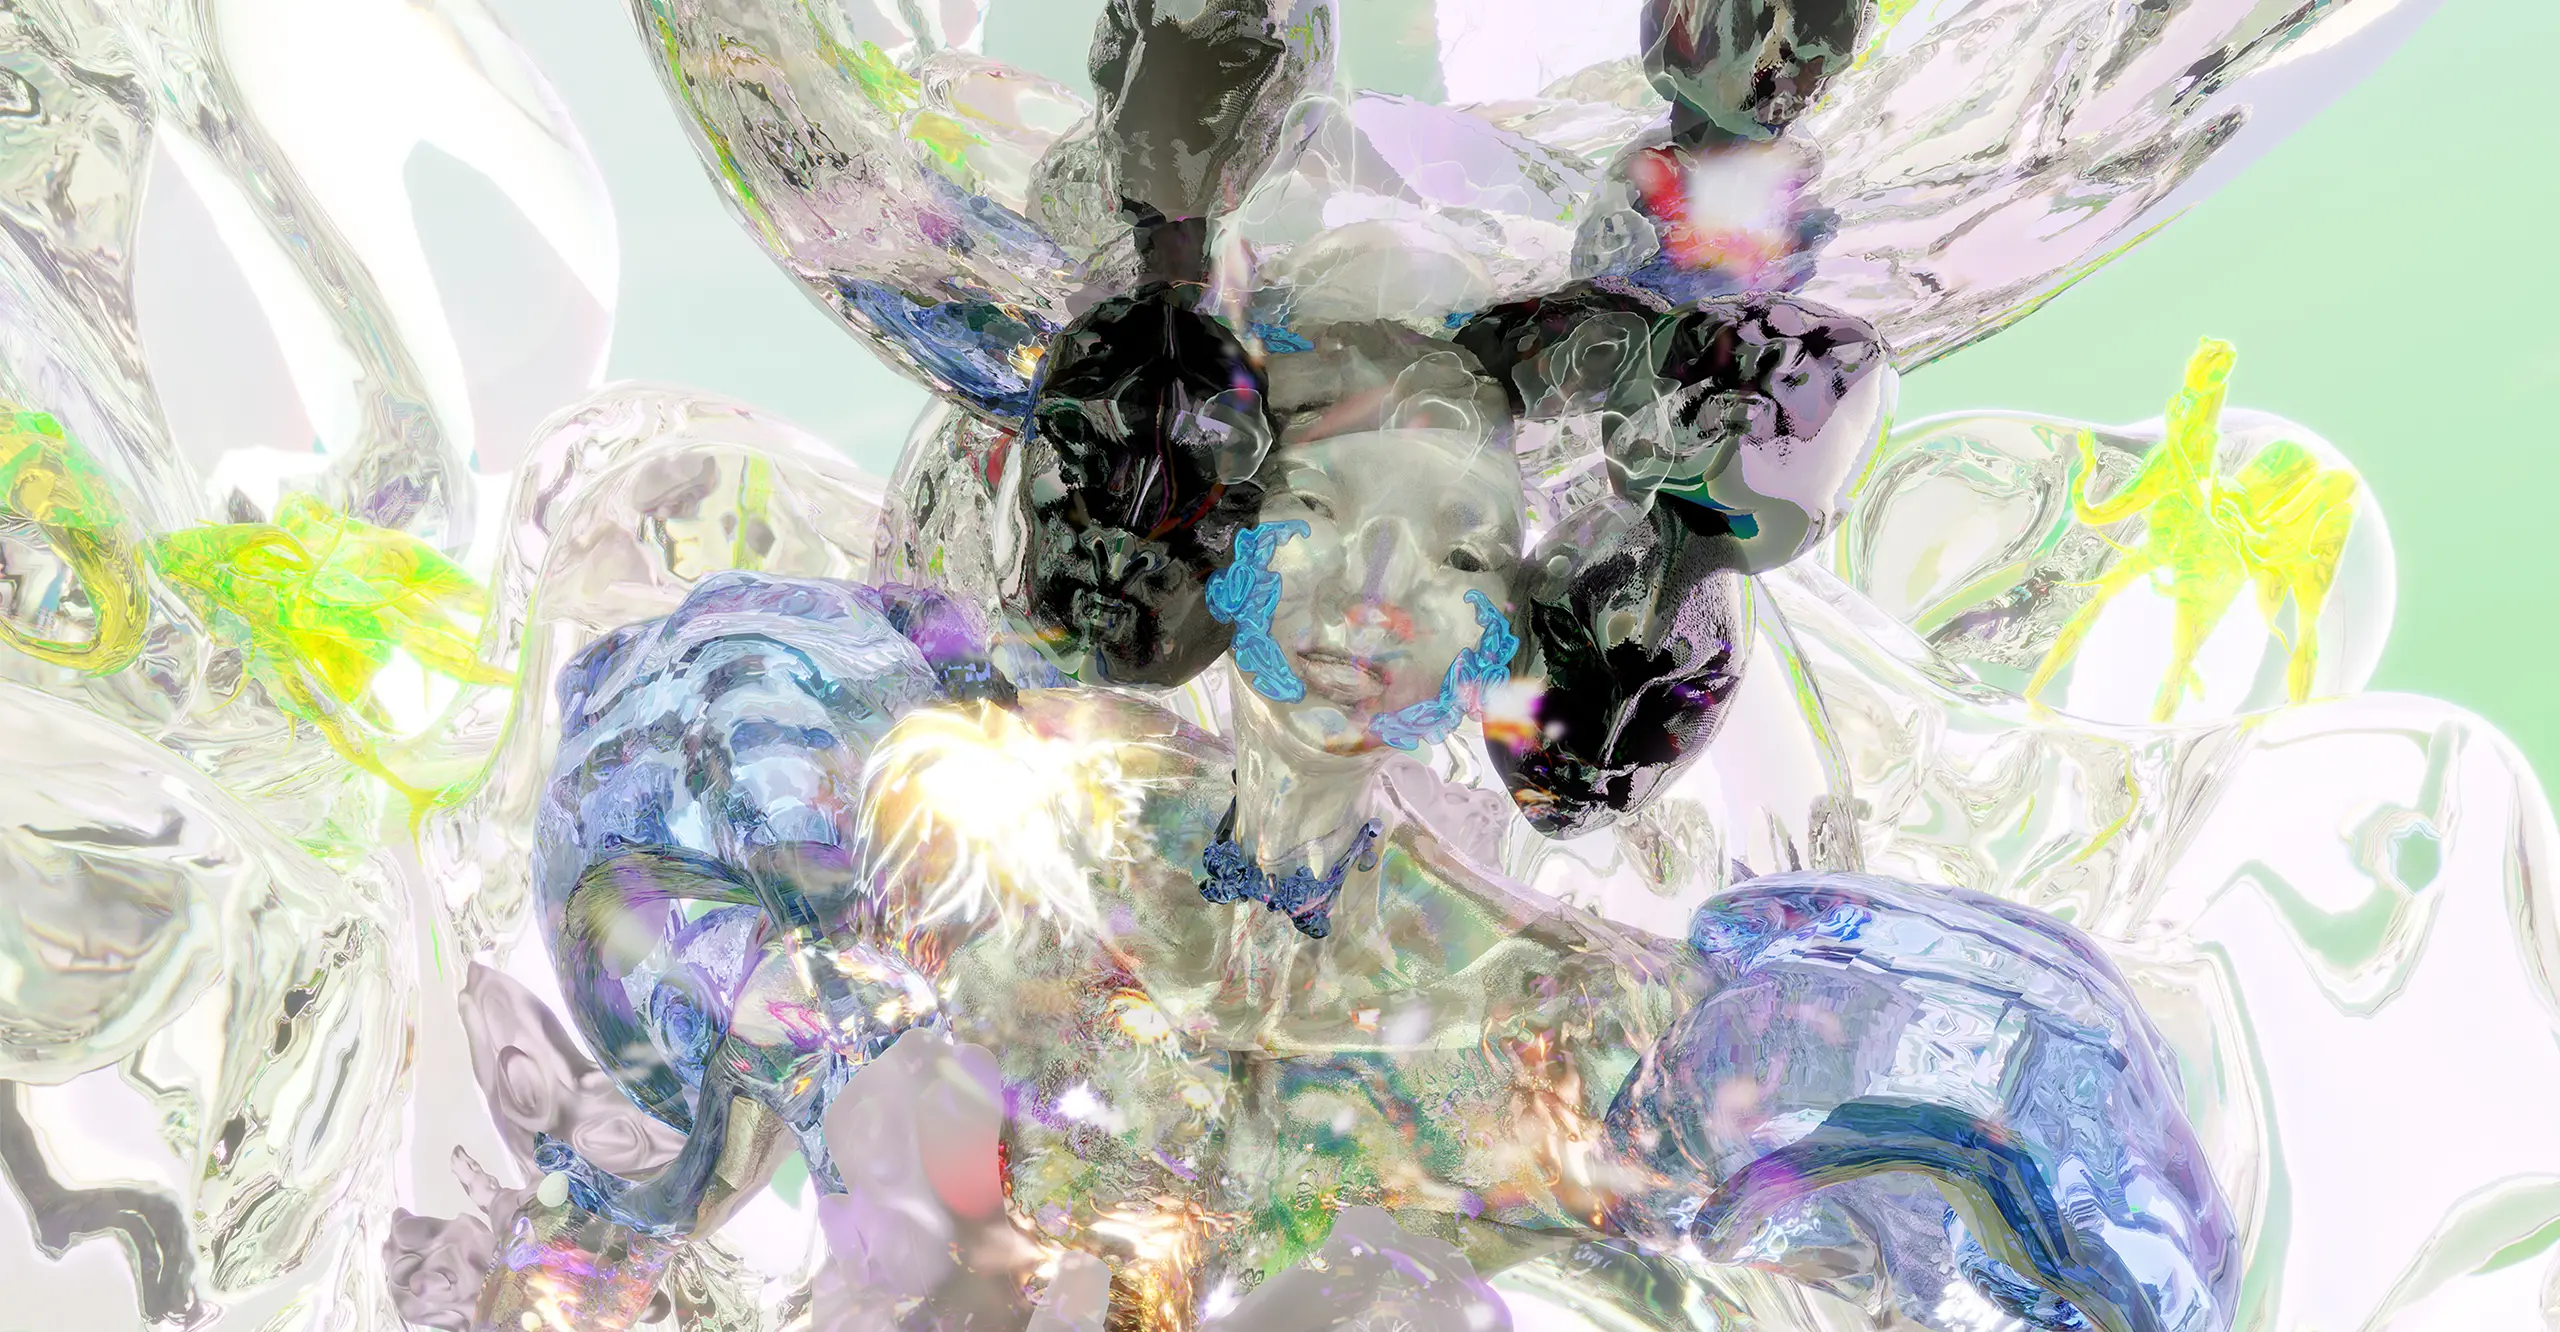 A highly computer generated image of the top of an otherwordly figure, covered in reflective translucent materials